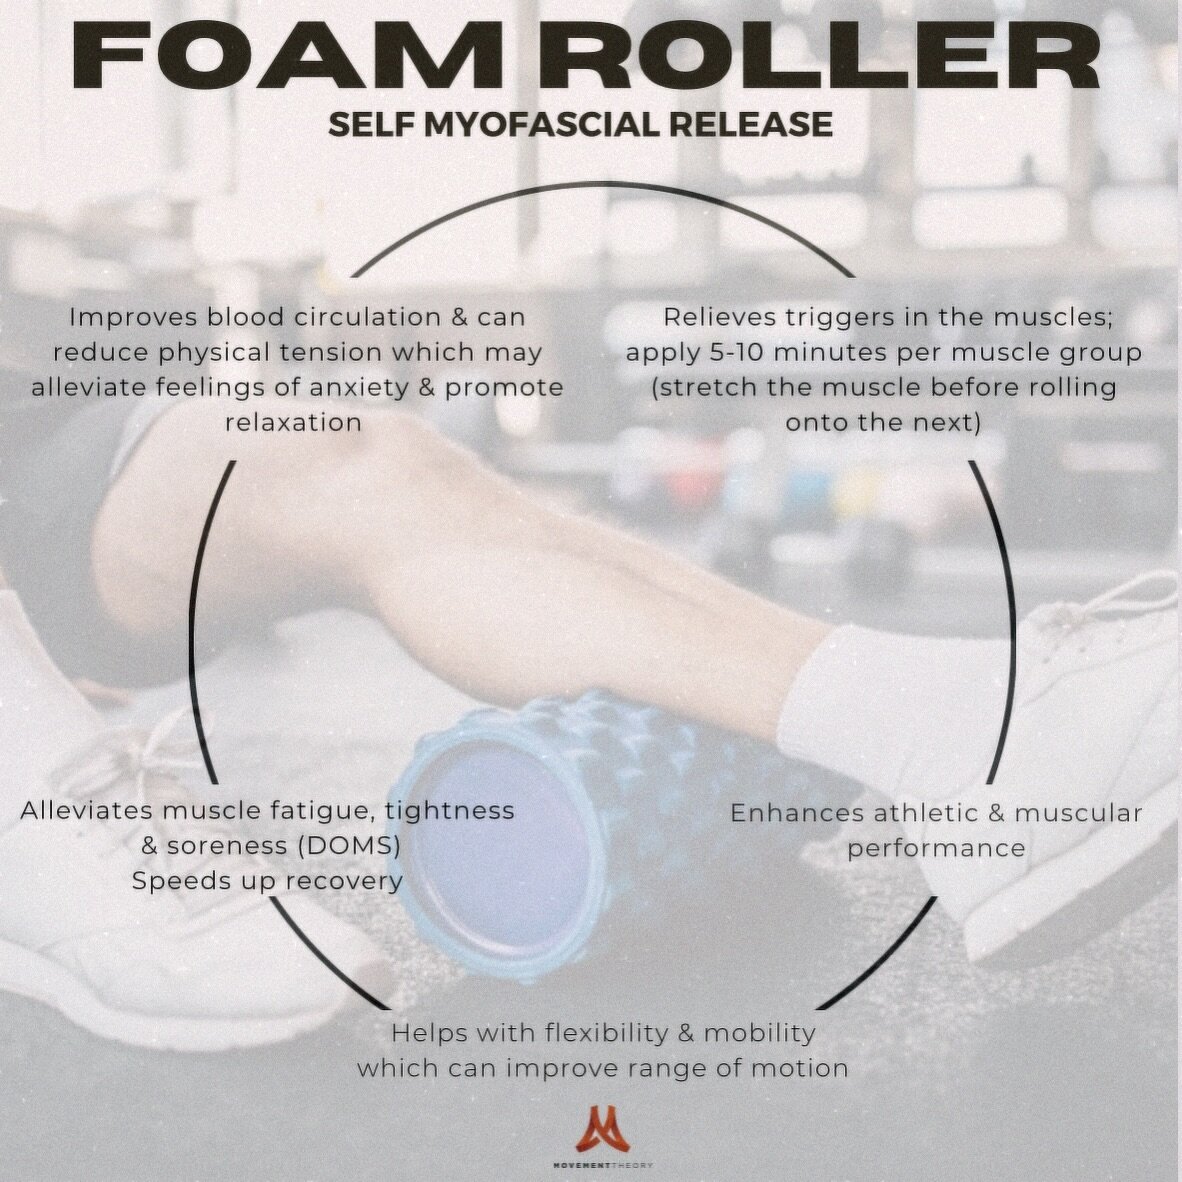 🌟 Consider adding Foam Rollers to your daily self care recovery routine! 🌟

Here at Movement Theory we have a love/hate relationship with the foam roller BUT it is handy to use for a quick self-release whether you&rsquo;re at home, work or at train